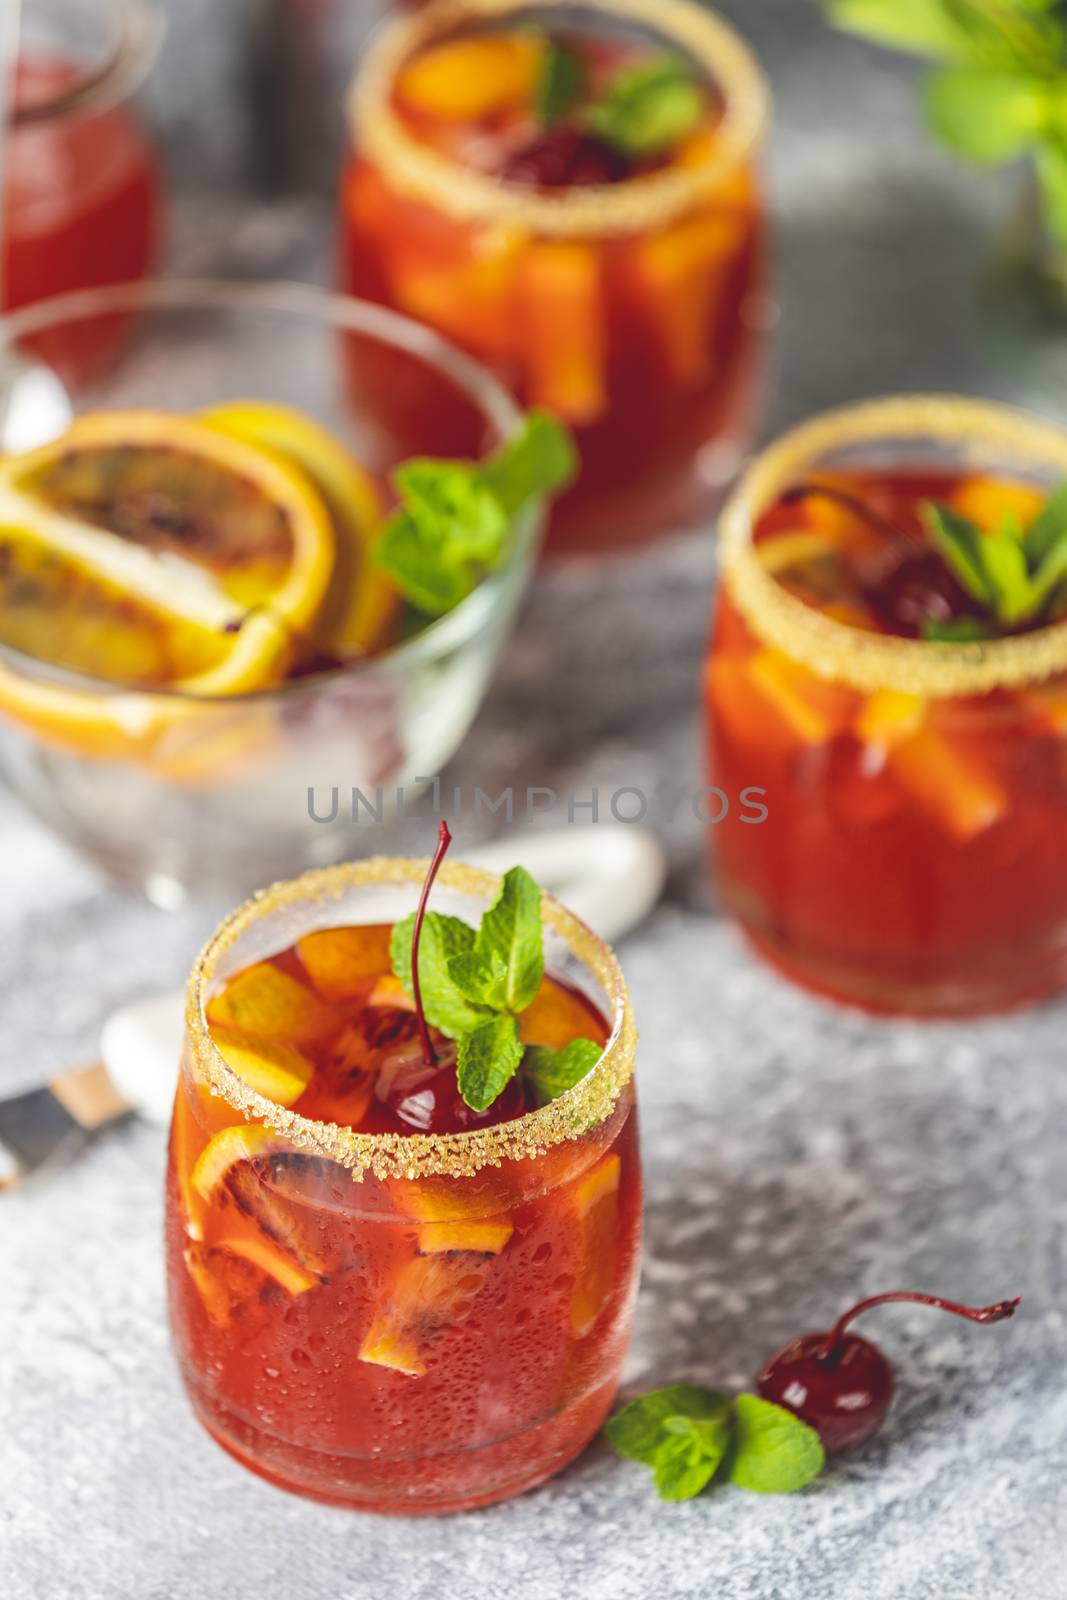 Italian aperol spritz cocktail with orange slices and ingredient by ArtSvitlyna